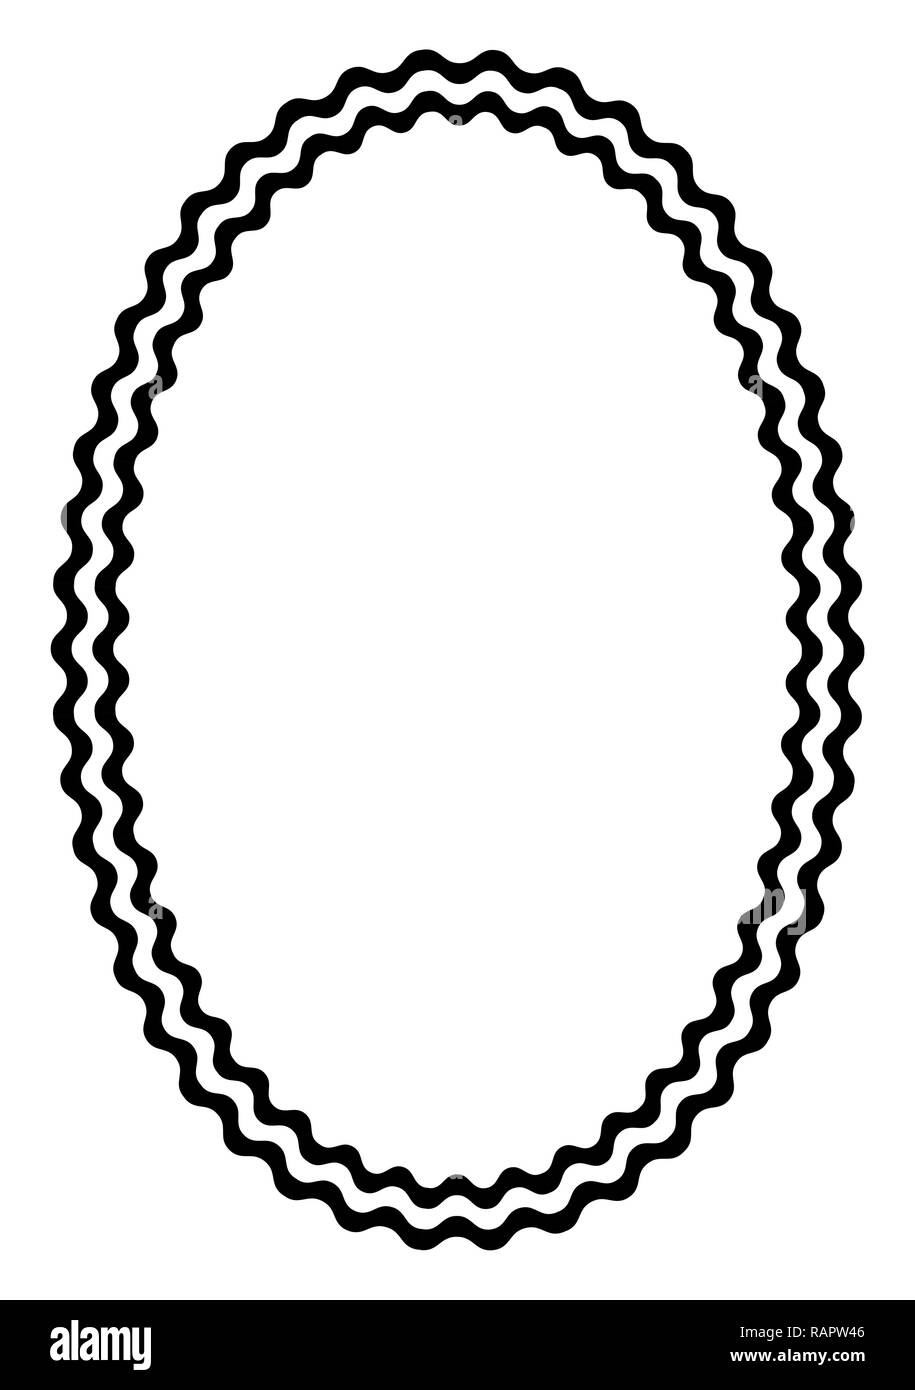 Greek round frame with waves lines. Typical egyptian, assyrian and greek motives circle border. vector Stock Vector